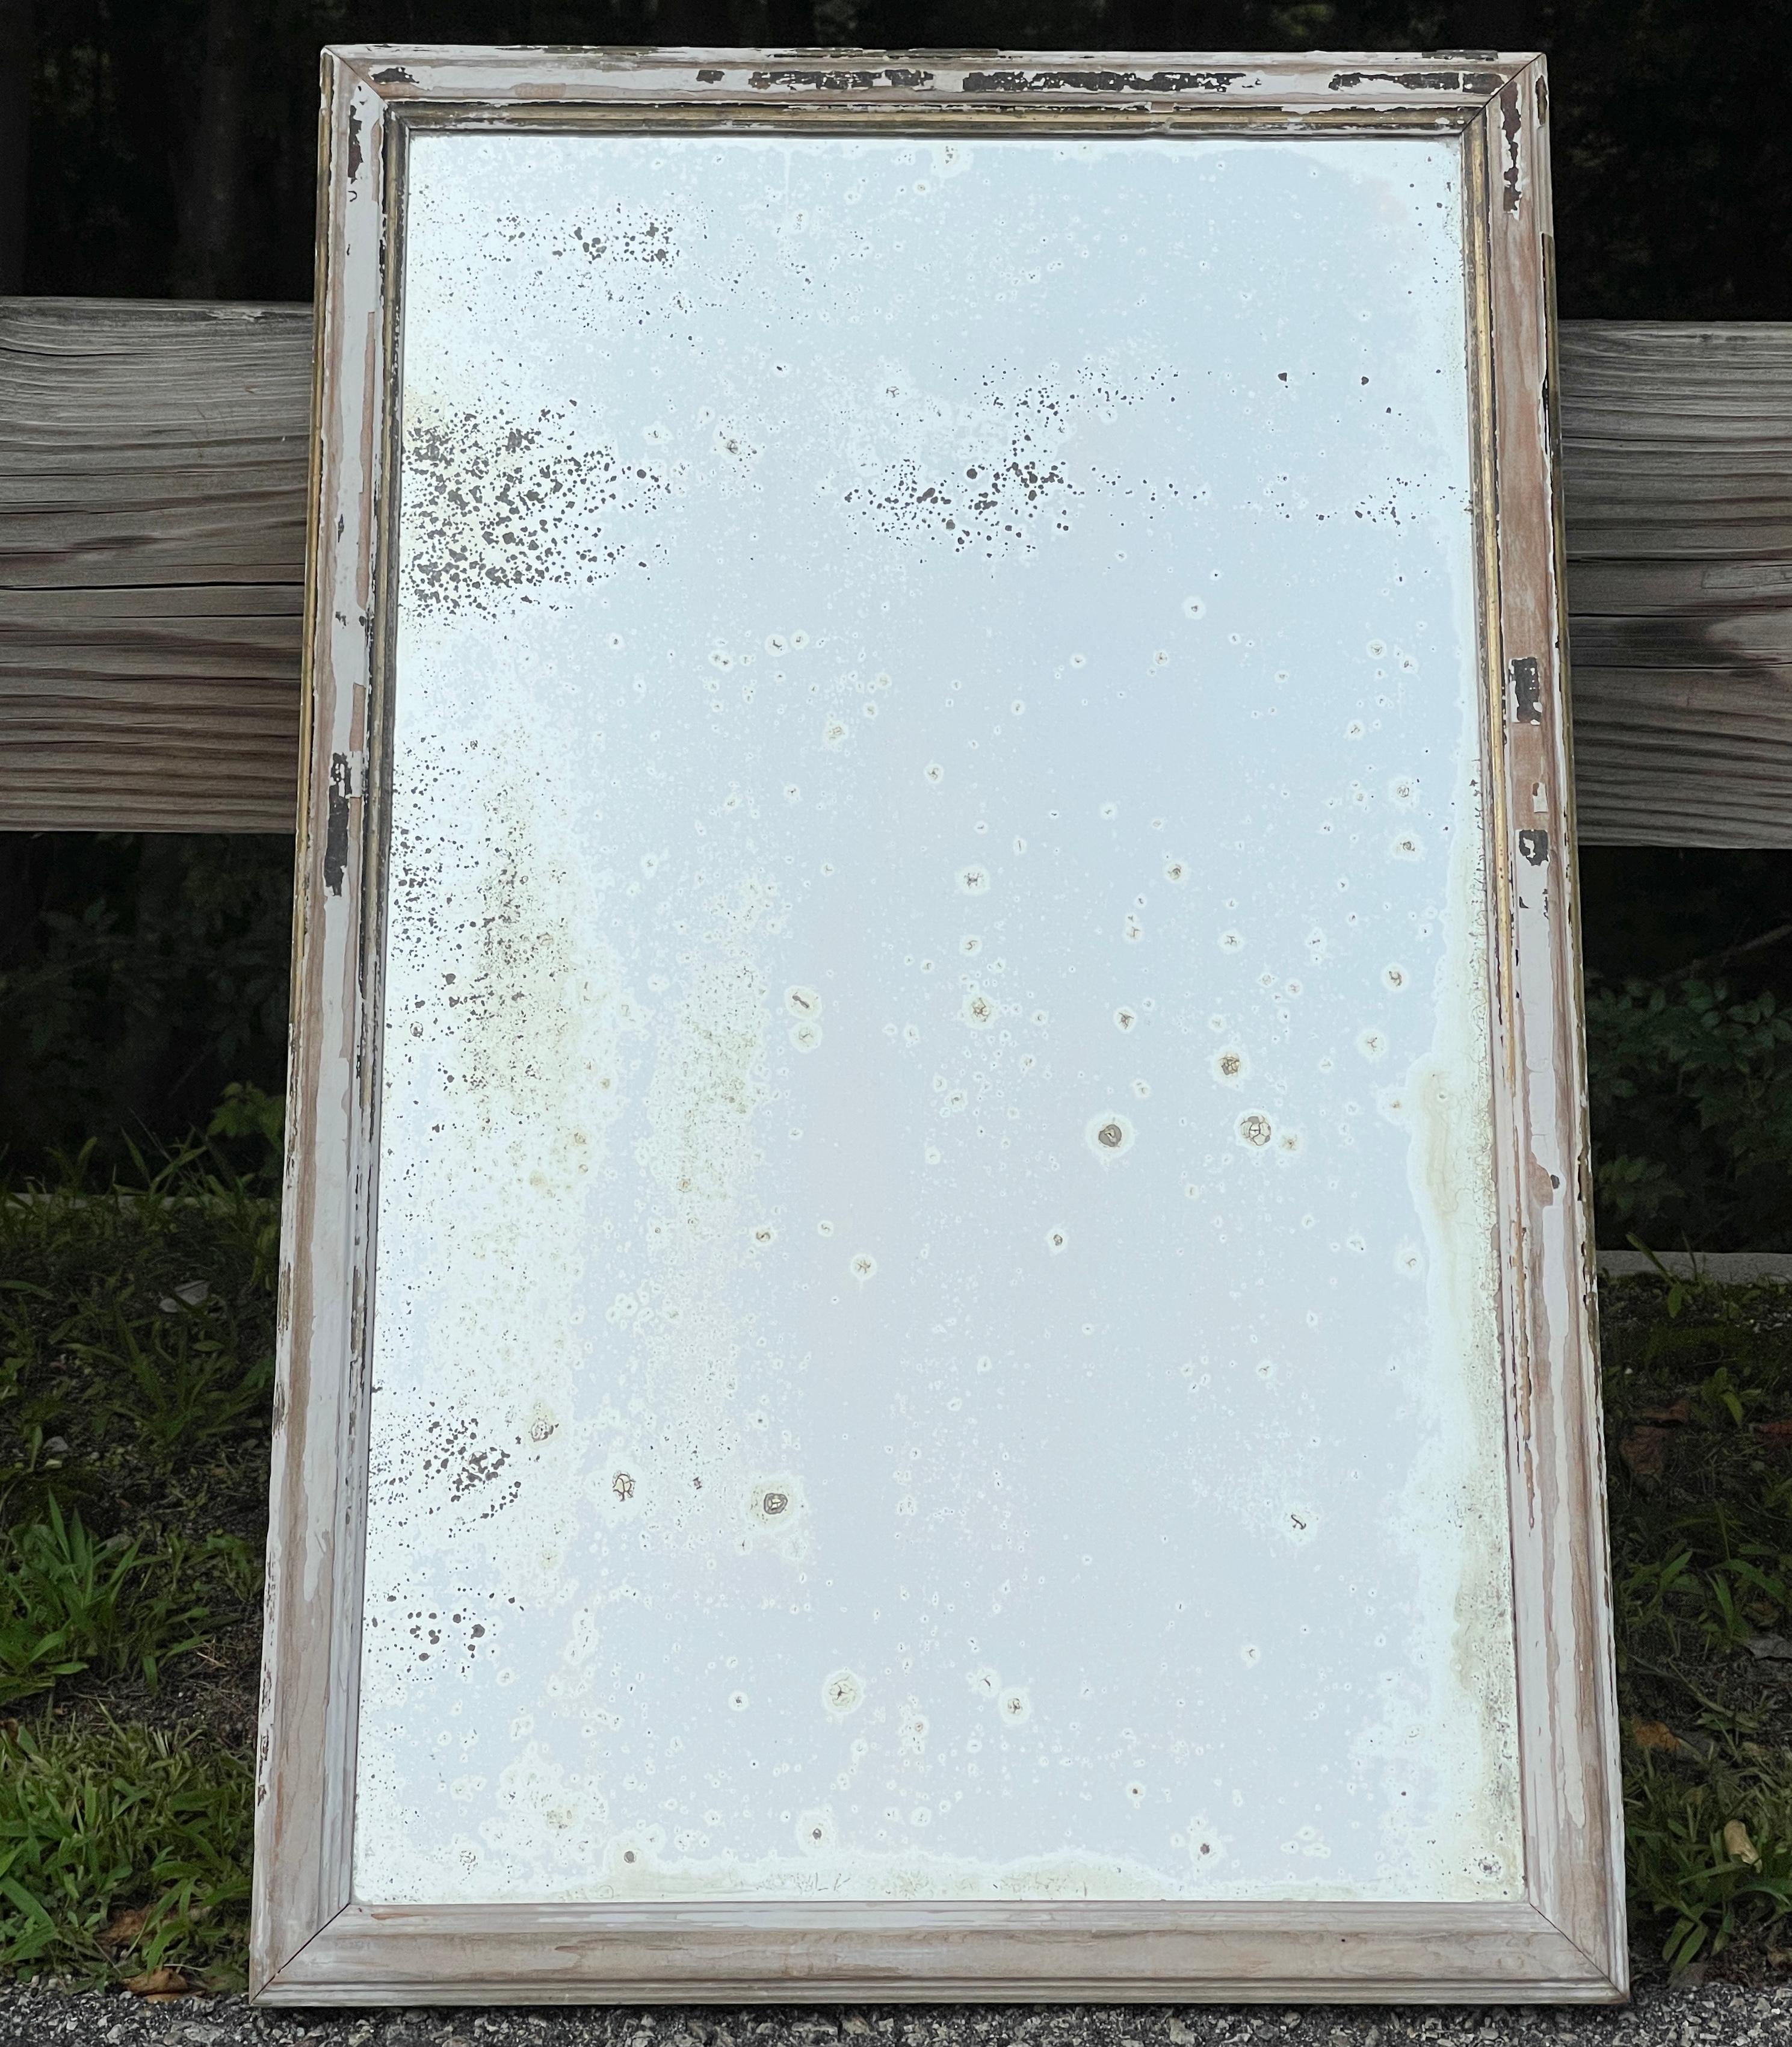 Very attractively distressed old mirror in a distressed old wood frame with traces of old paint.